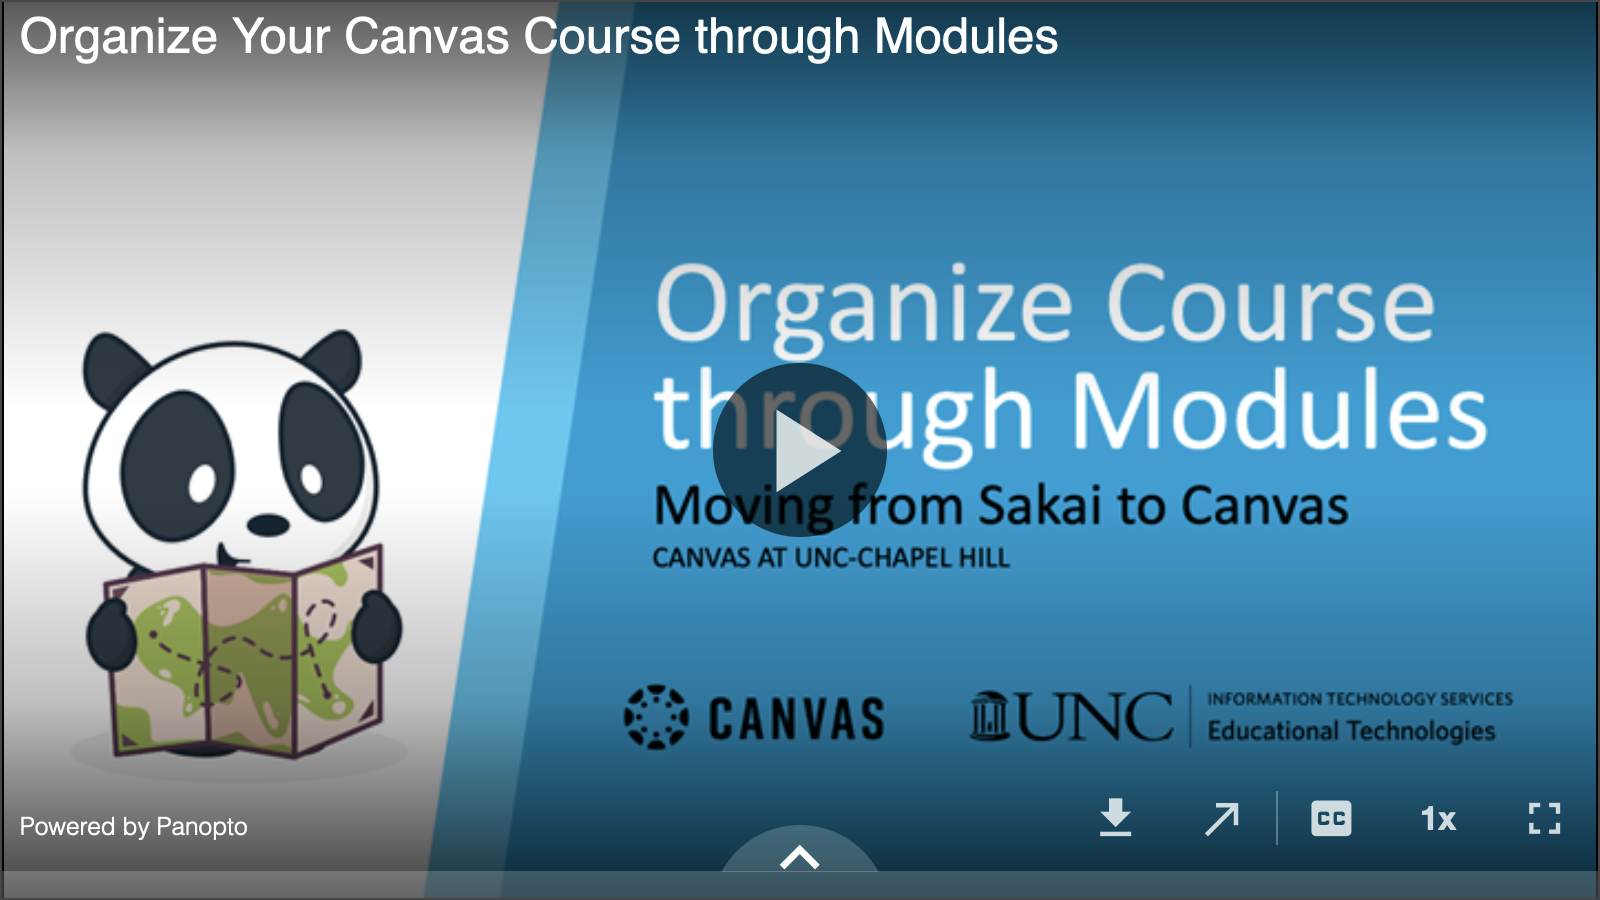 View recording on organizing course through Canvas modules